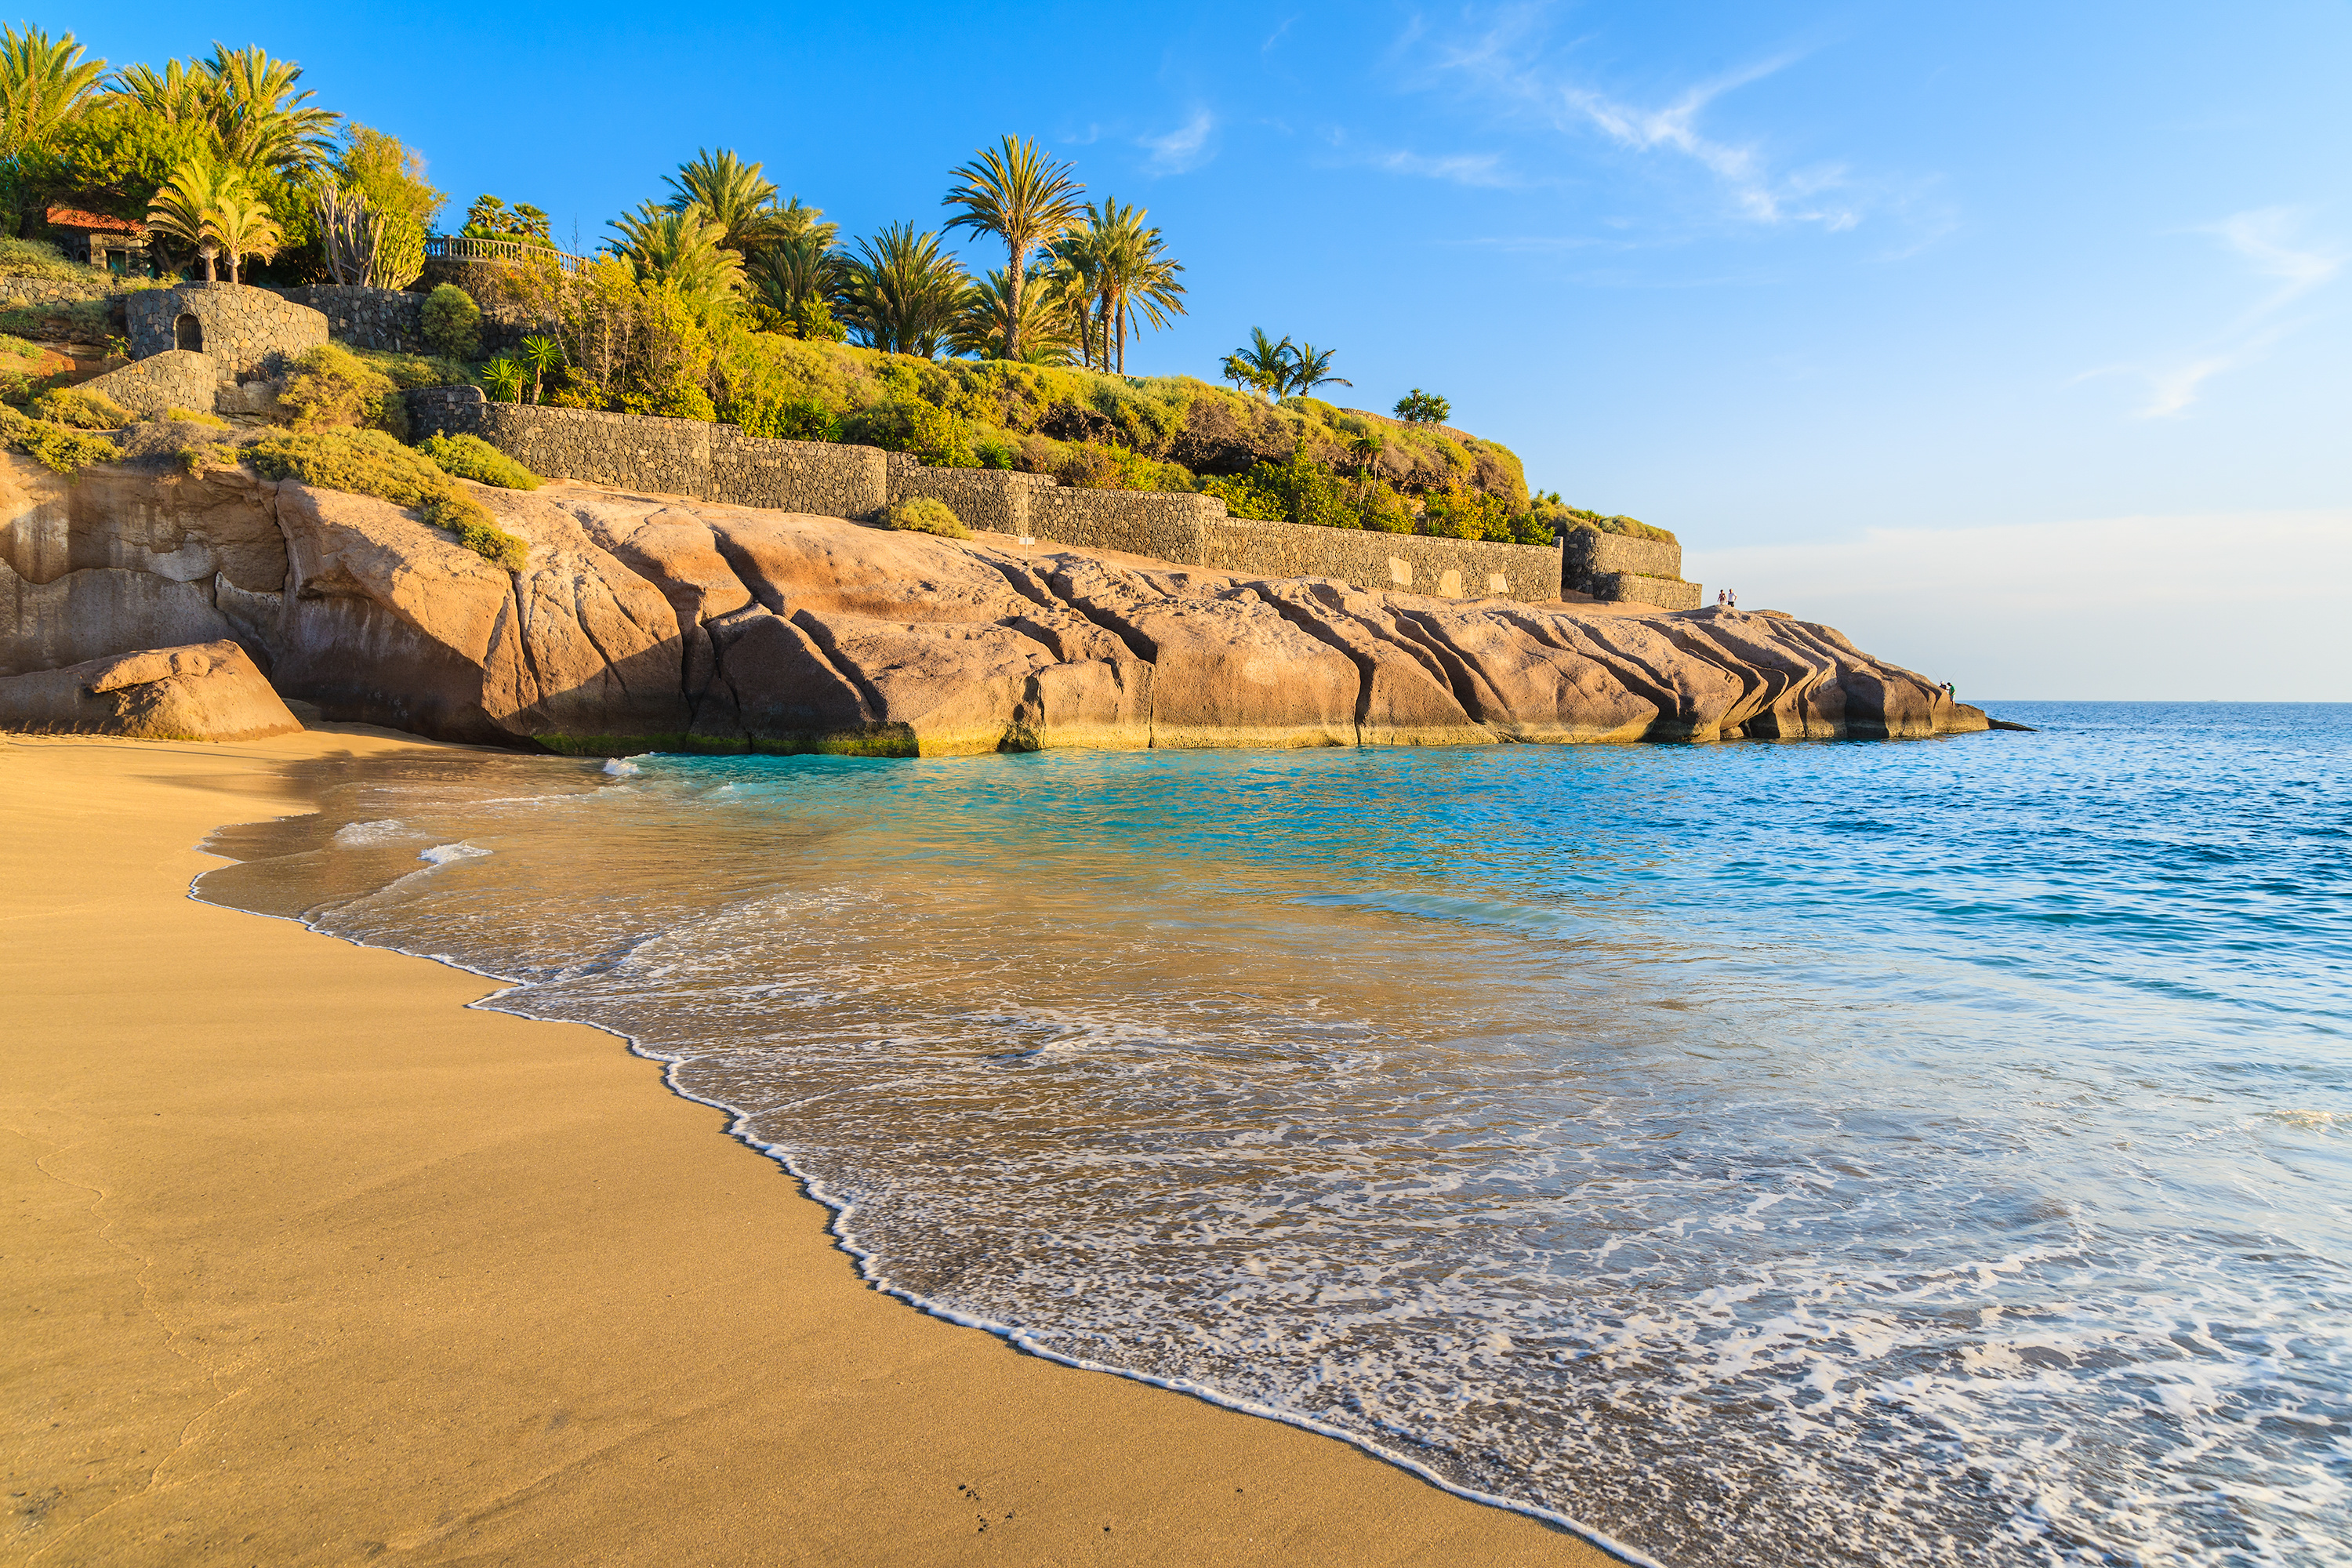 Playa del Duque beach, a place to relax and enjoy